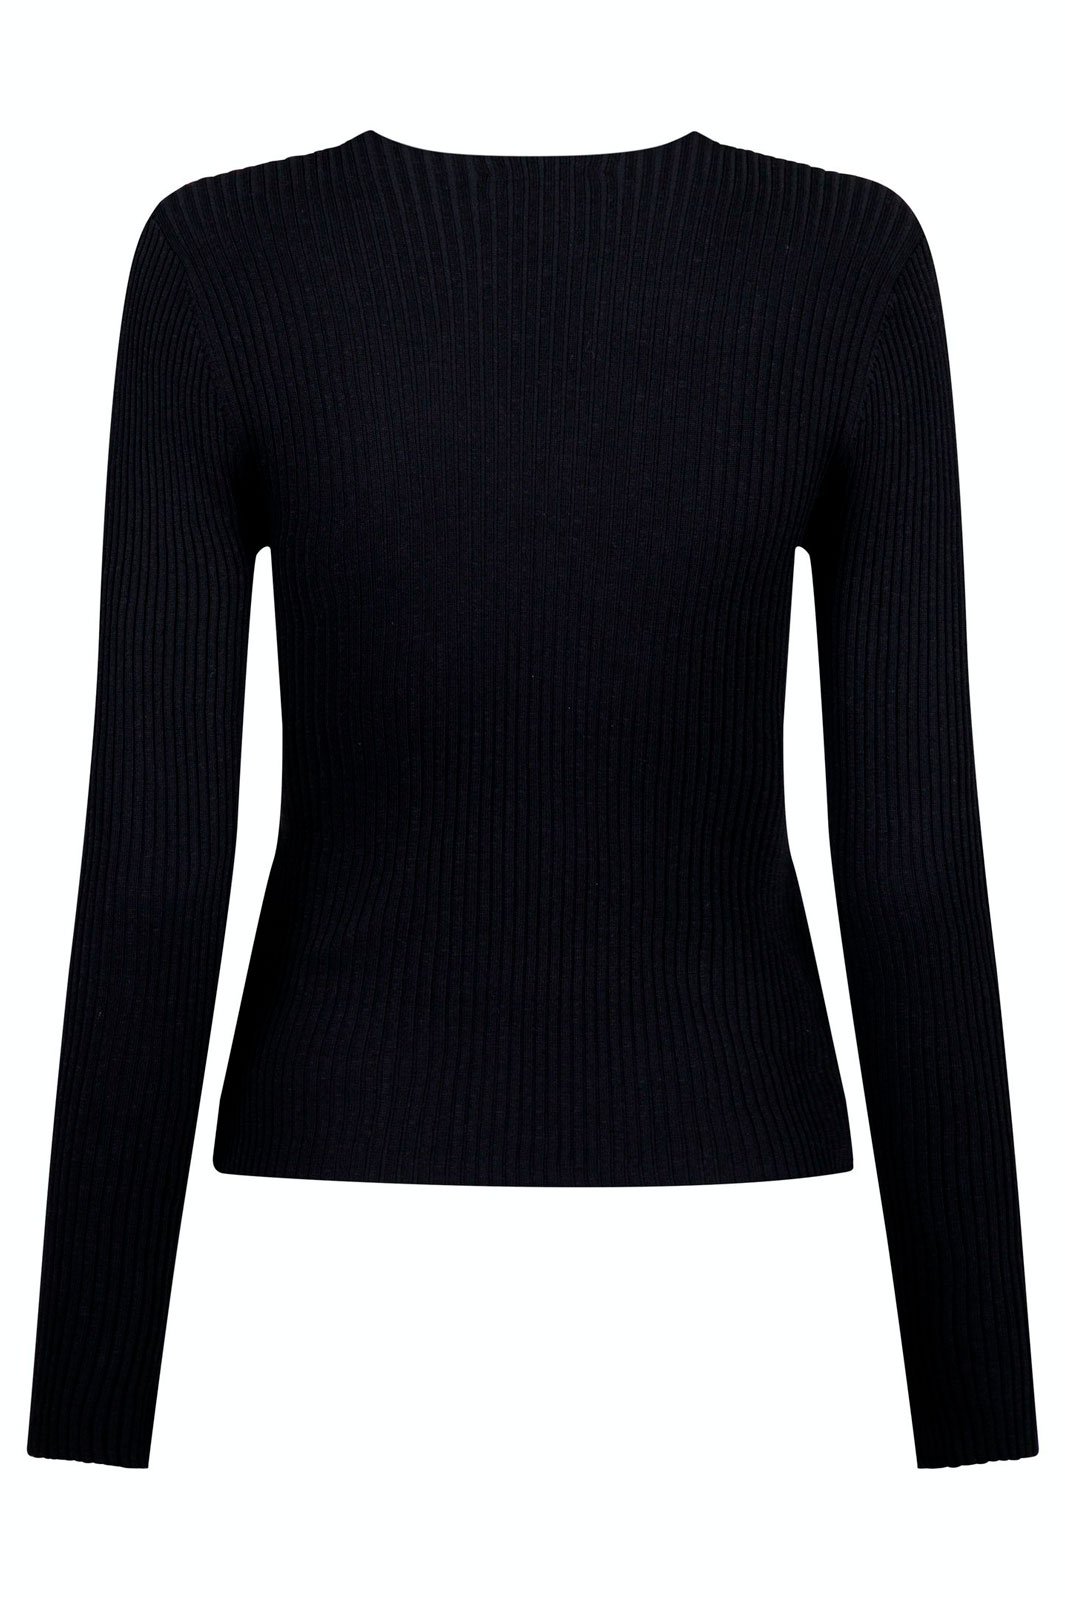 Neo Noir - Italy Solid Blouse - Black